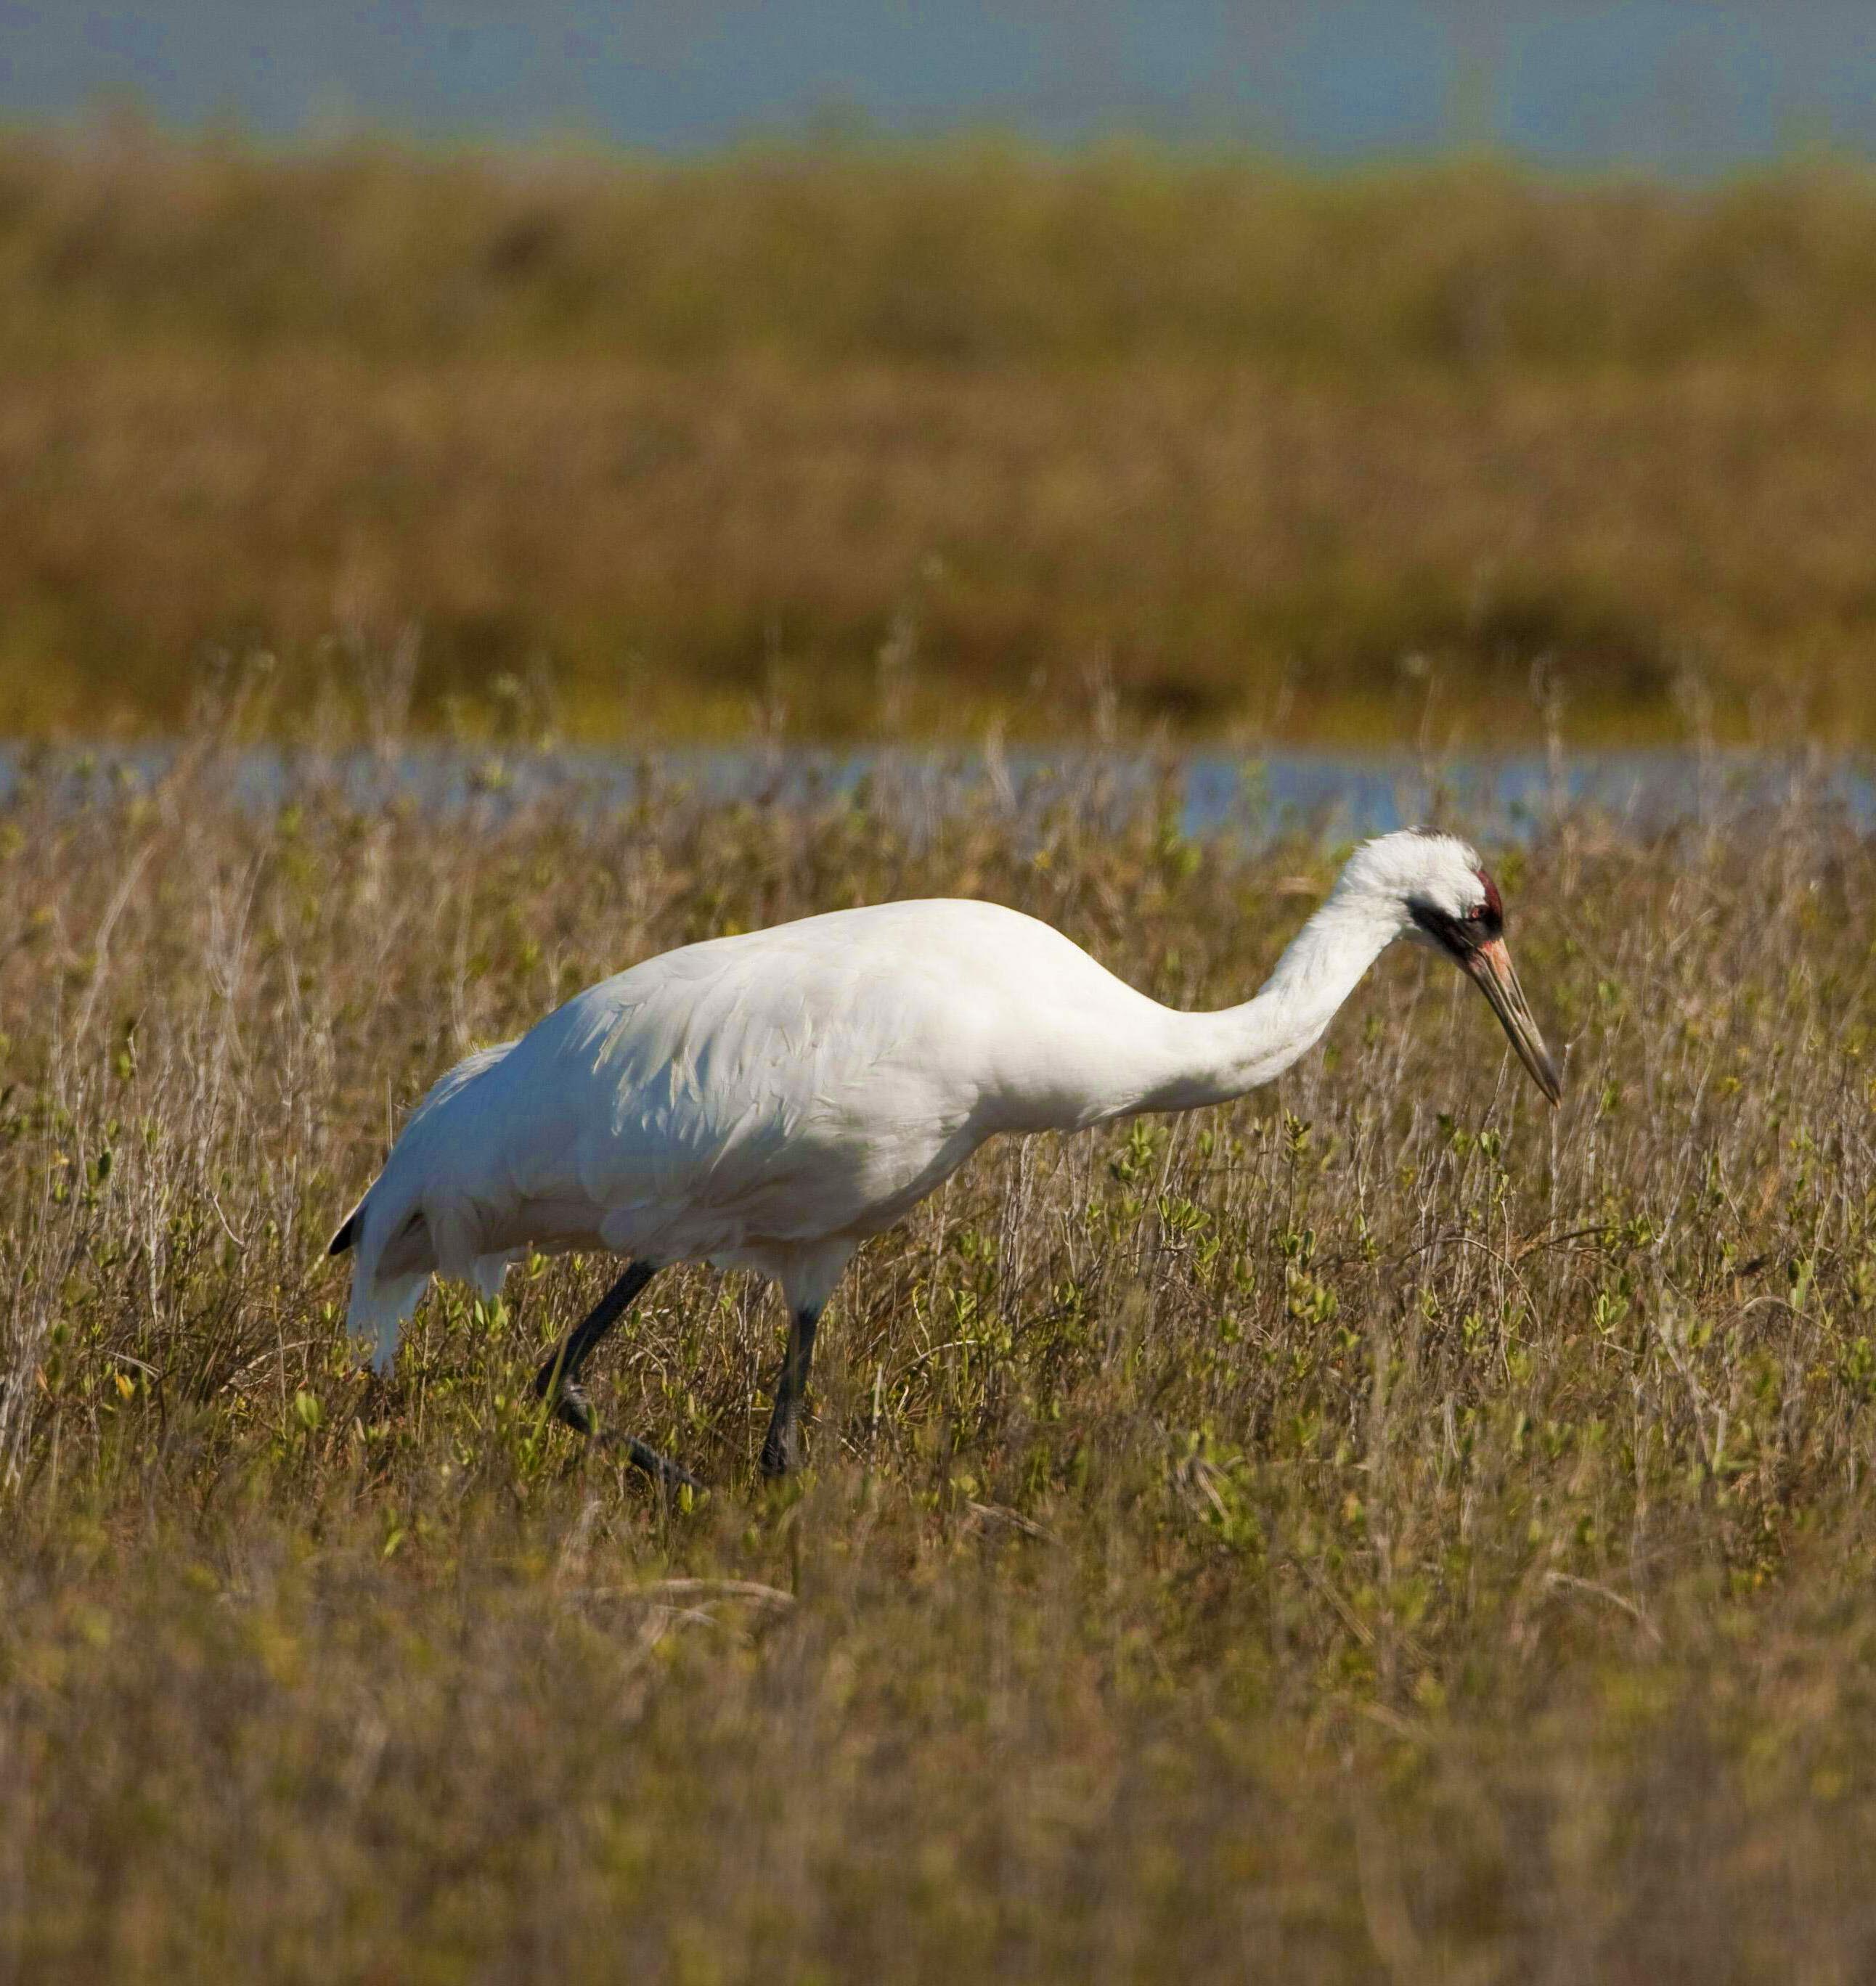 A large bird with white feathers wades through a marsh.